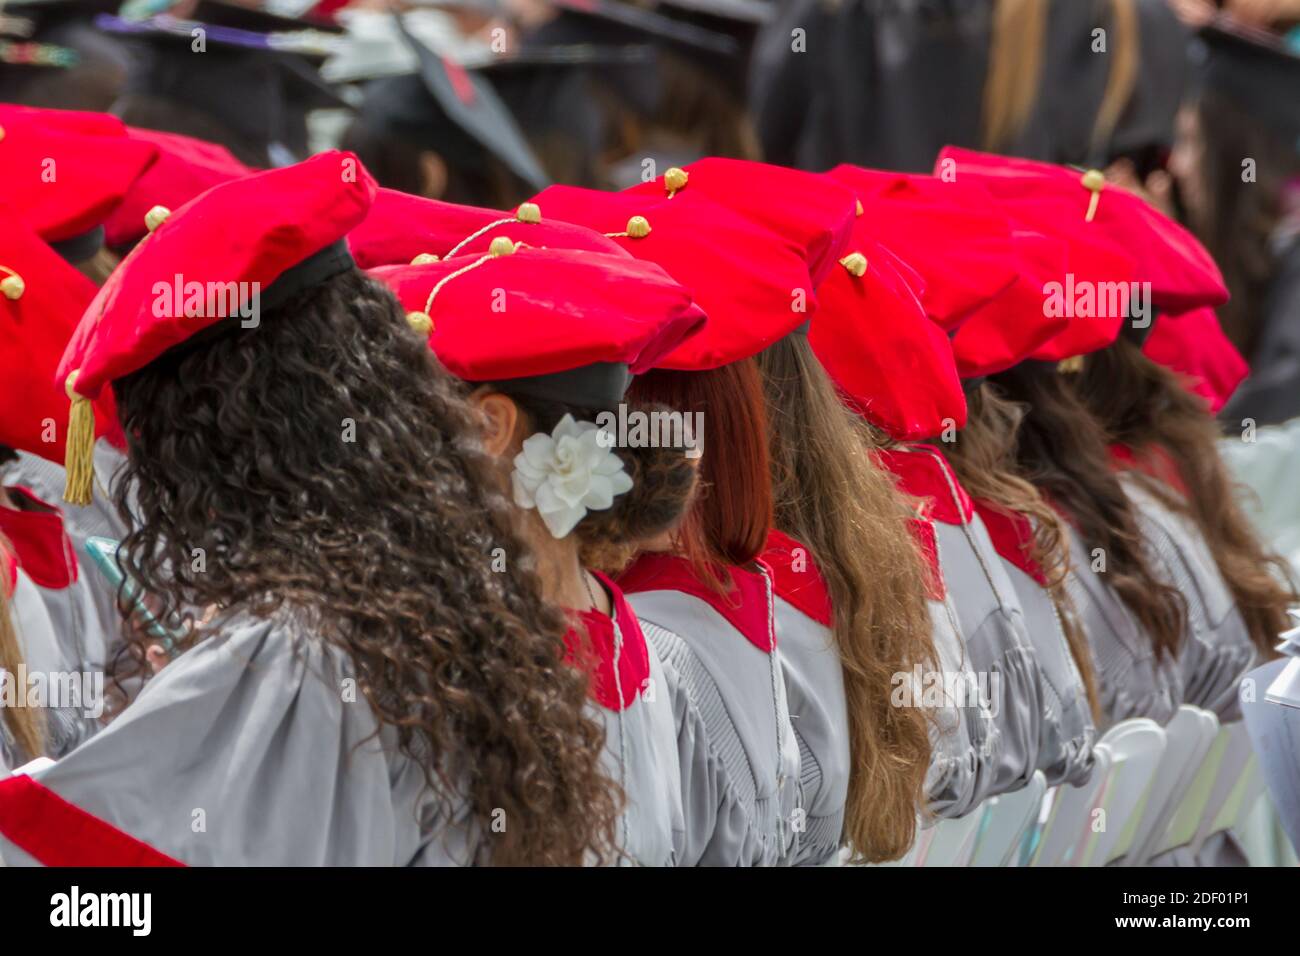 Full Spectrum Graduates - Recipients of the doctorate degree with a variety of hair colors and styles. Chapman University, Orange, California, USA Stock Photo